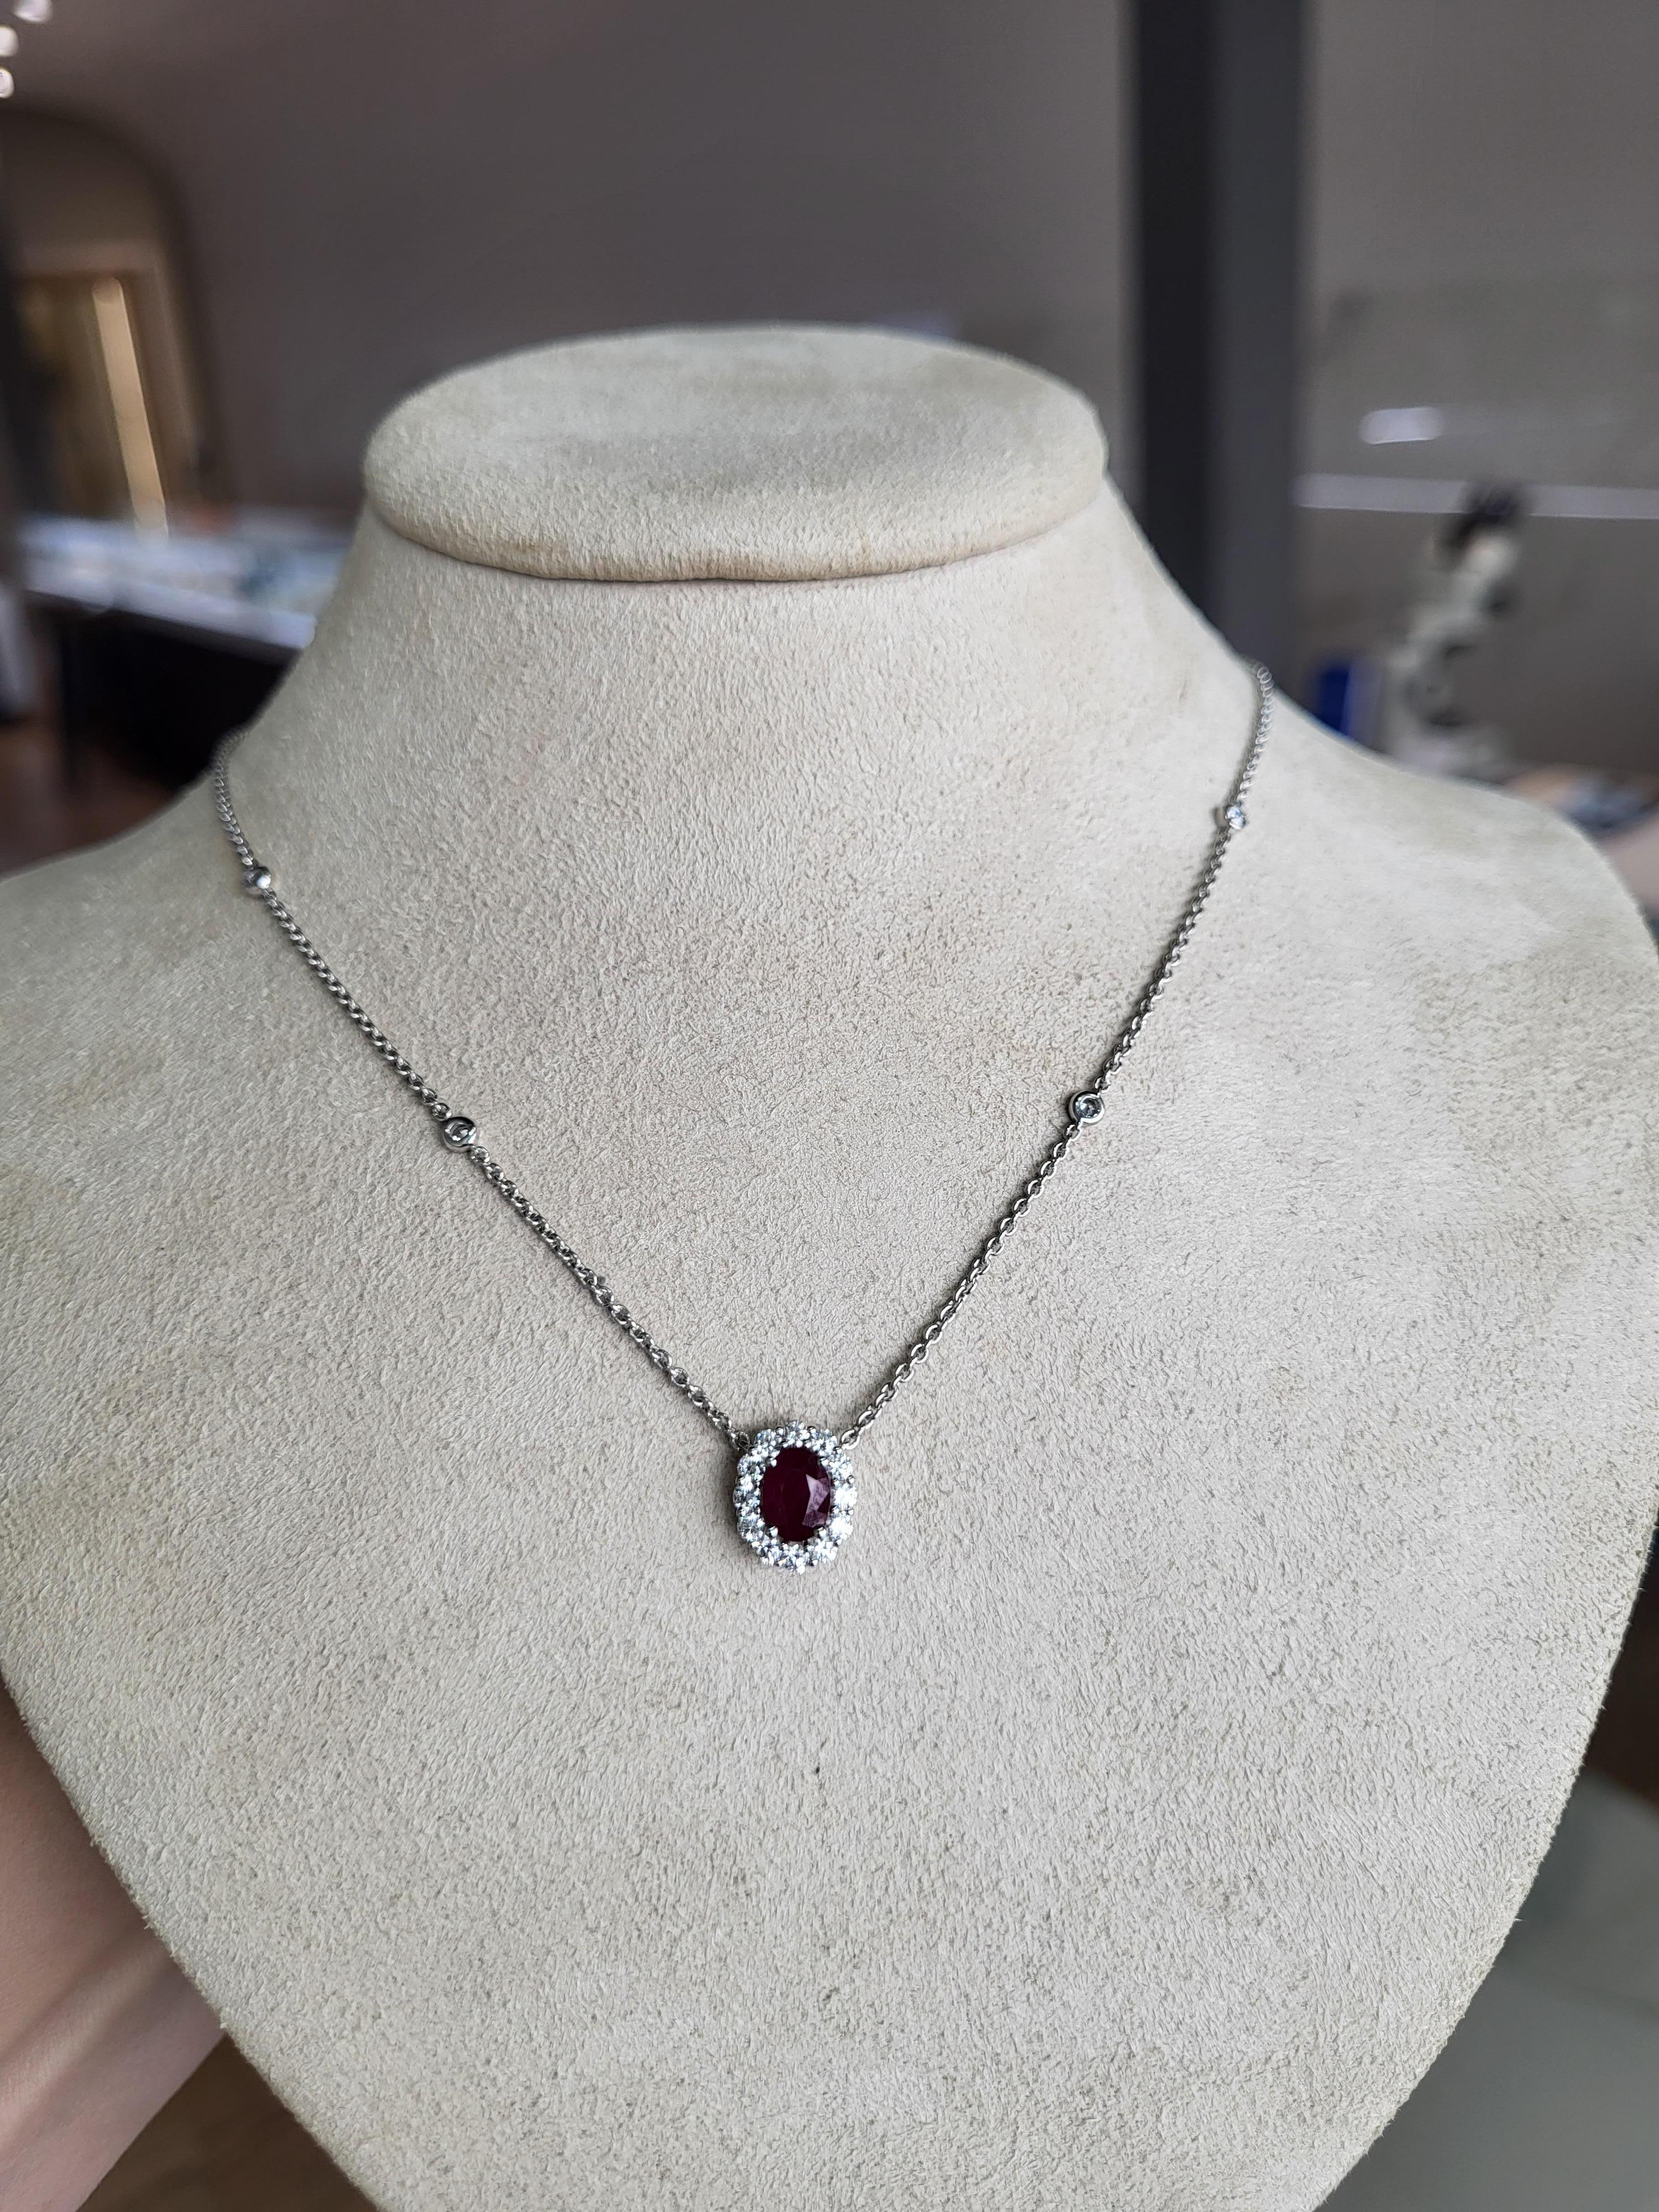 This beautiful pendant necklace features a 0.71 carat natural ruby accented by 0.48 carat total weight in round diamonds set in 18 karat white gold. The pendant is set on a diamond by the yards style chain. 
Measurements: Length 18